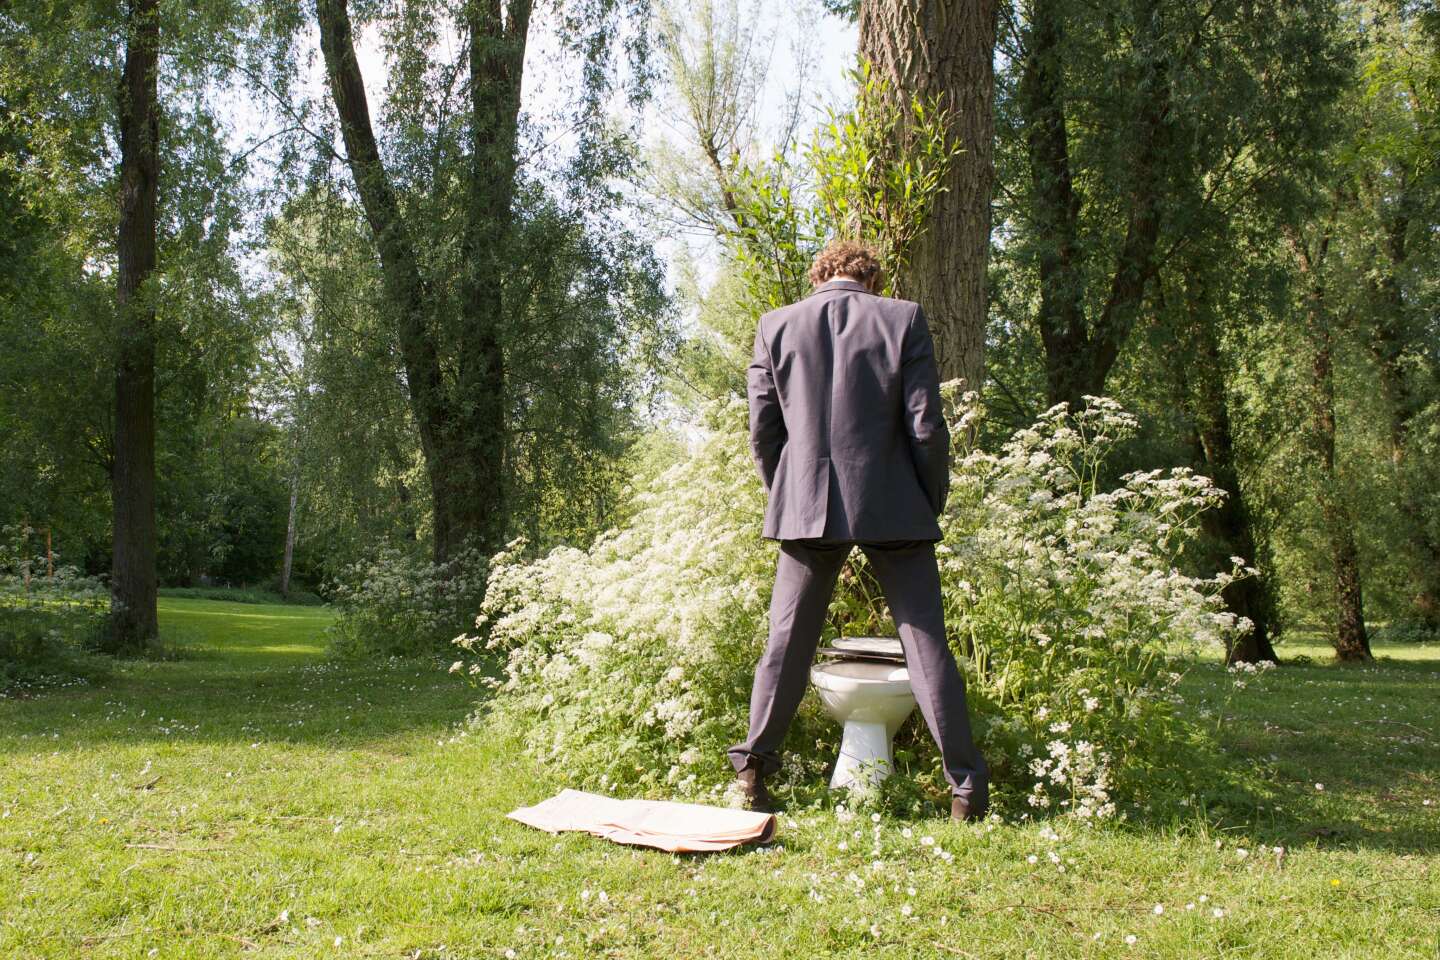 Beware of splashback: For many men, 'peeing standing up is a form of pride